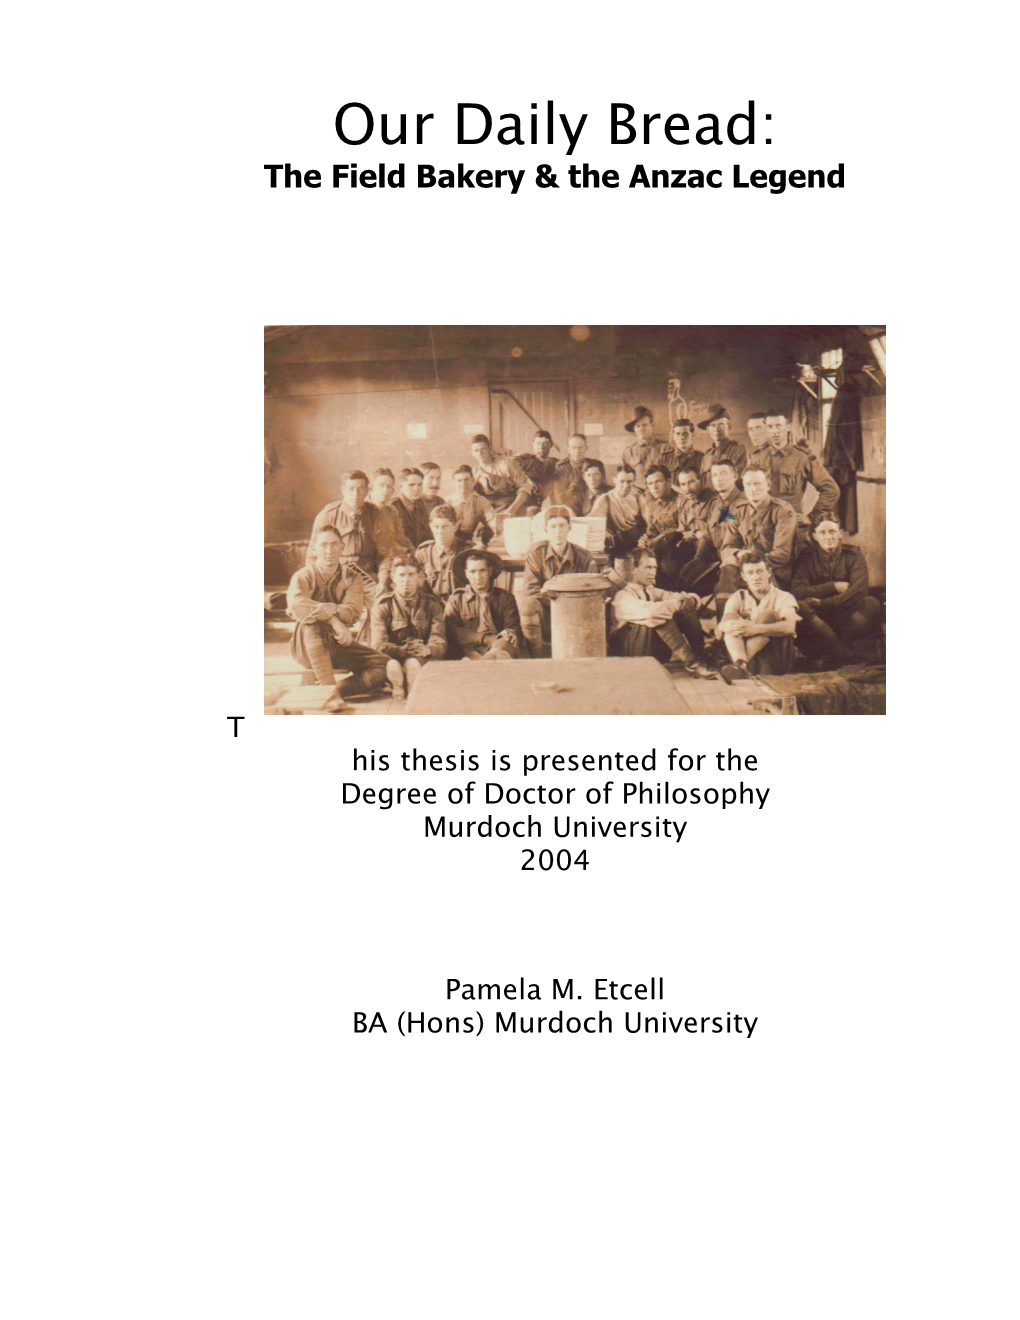 Our Daily Bread: the Field Bakery & the Anzac Legend